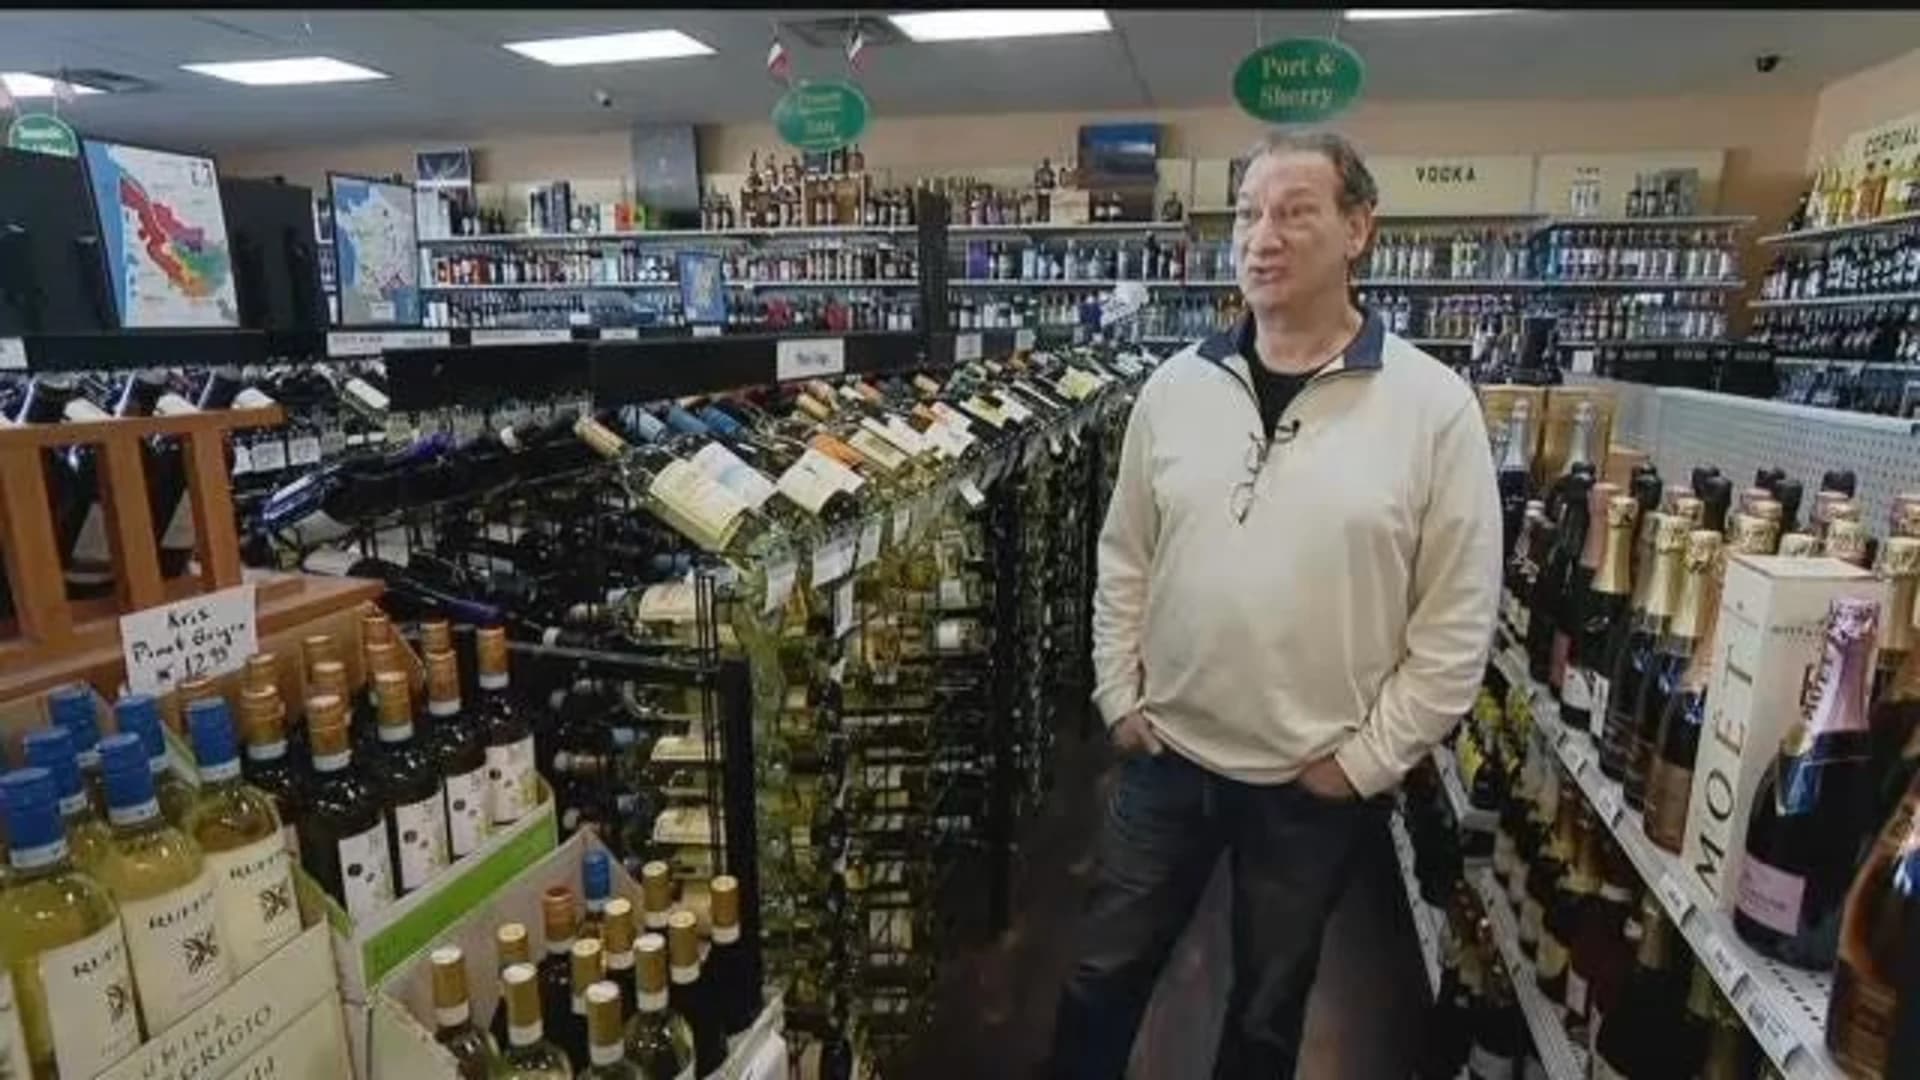 Small stores lobby against Connecticut liquor law changes